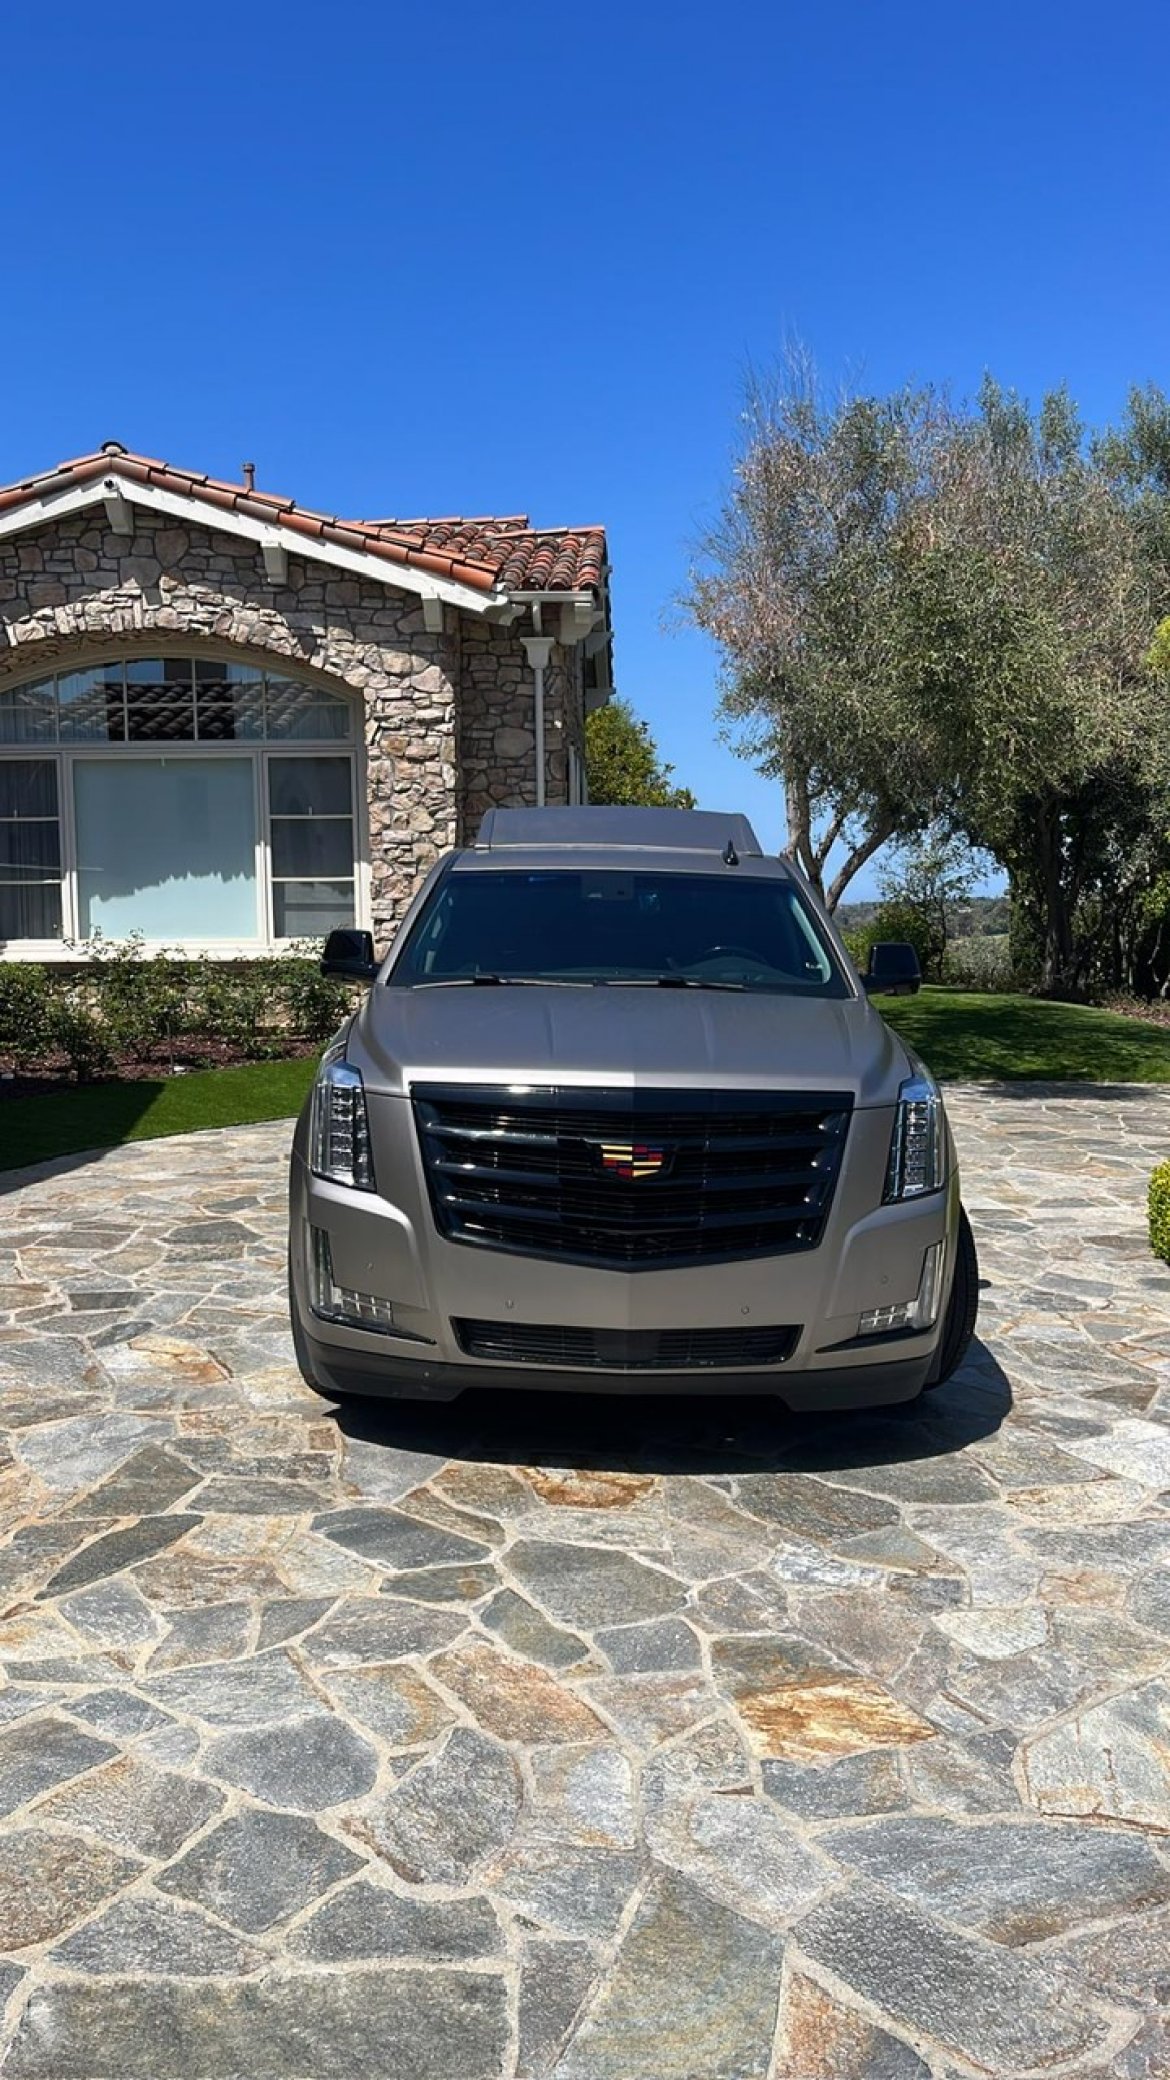 CEO SUV Mobile Office for sale: 2017 Cadillac Escalade ESV by Quality Coachworks